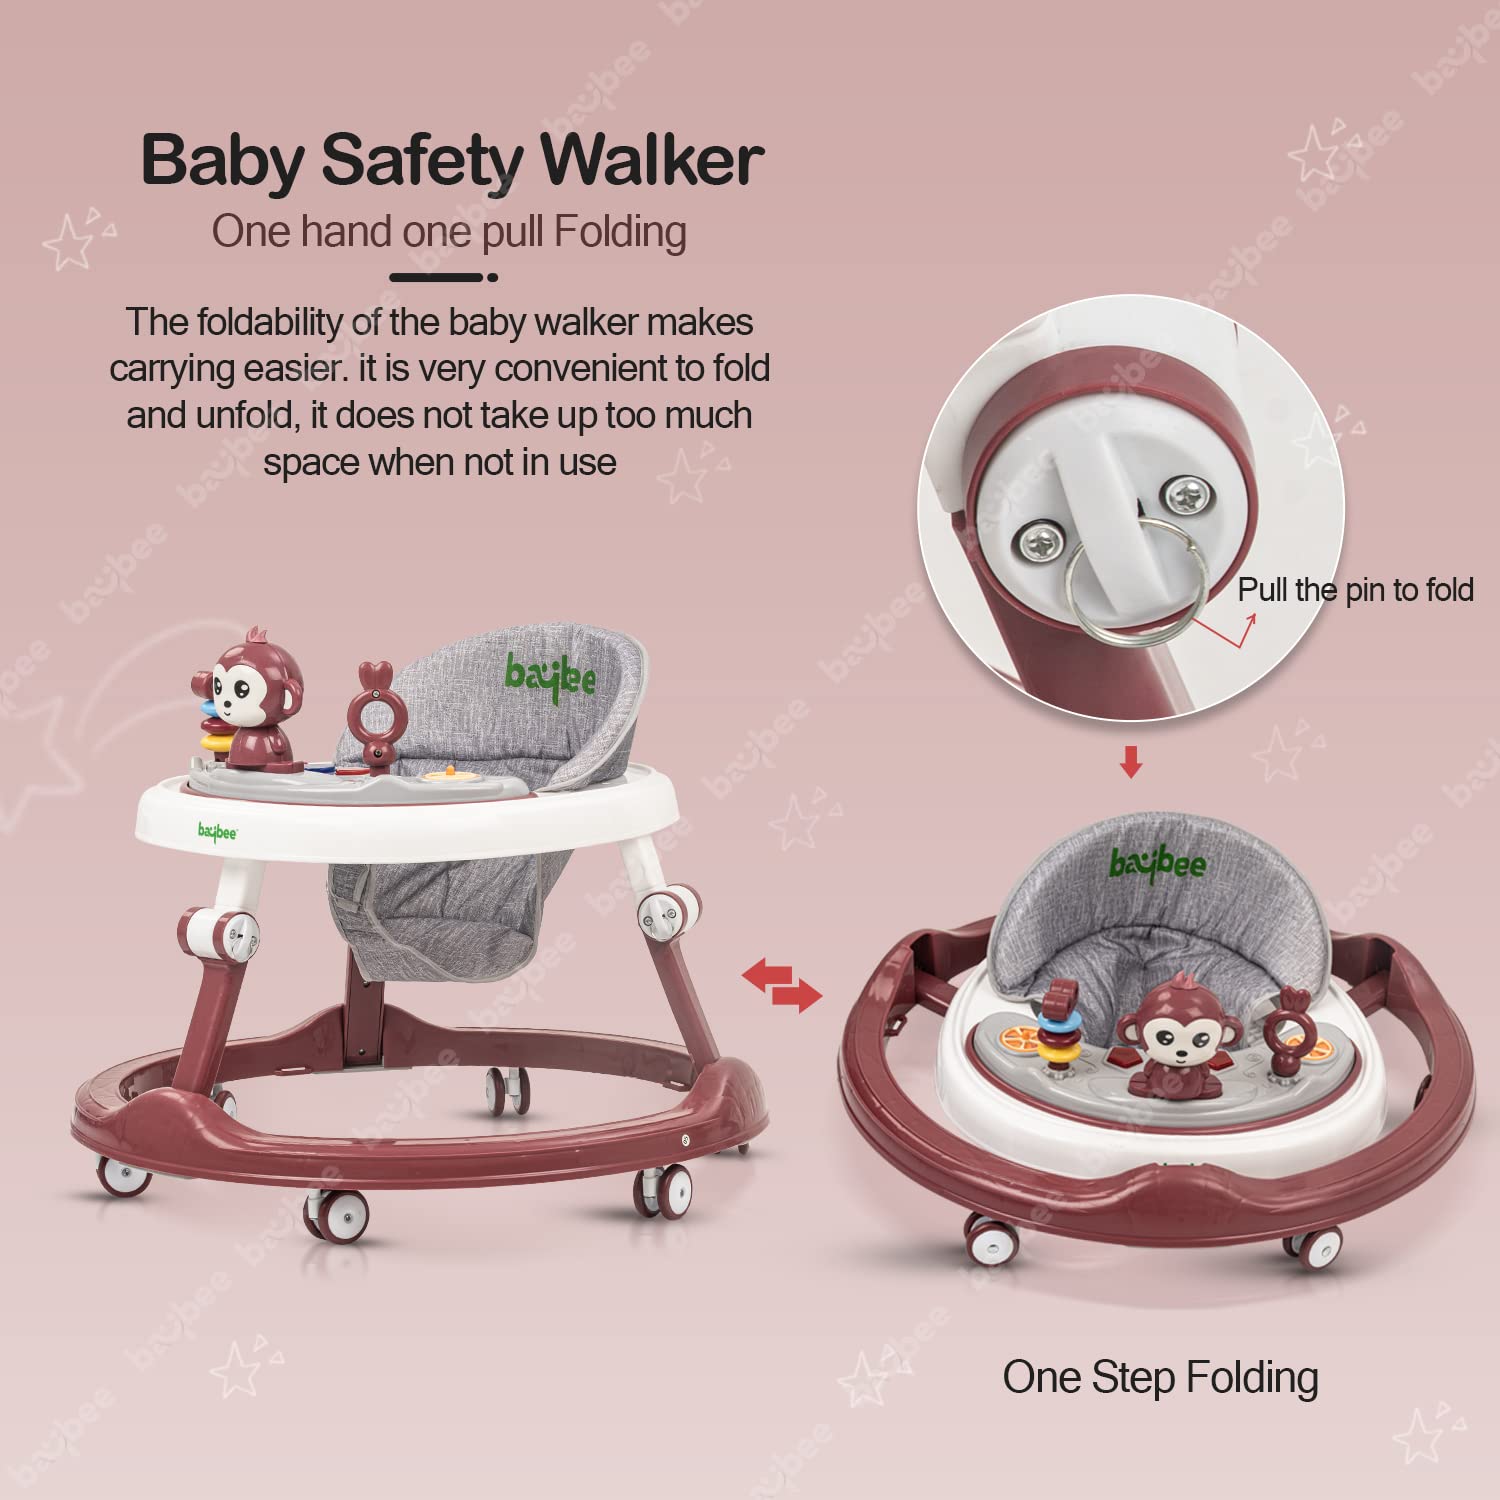 Baybee Drono Baby Walker for Kids, Round Kids Walker with 4 Seat Height Adjustable | Activity Walker for Baby with with Food Tray & Musical Toy Bar | Walker for Baby 6-18 Months Boys Girls (Red)